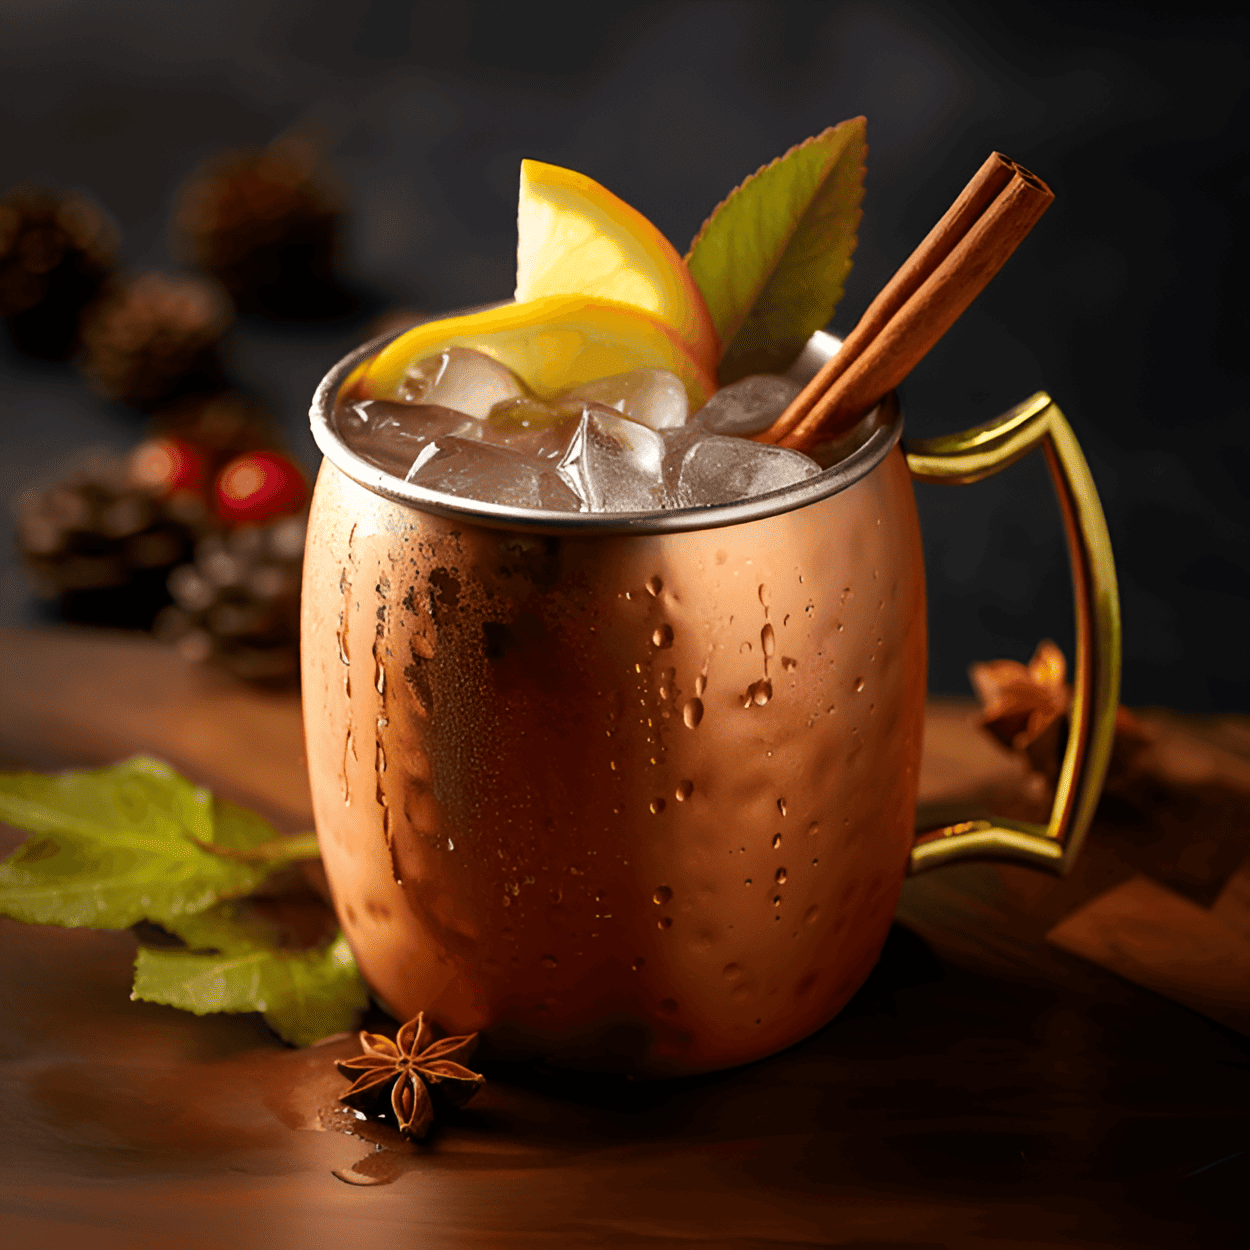 Spiced Apple Mule Cocktail Recipe - The Spiced Apple Mule is a harmonious blend of sweet, spicy, and tangy. The sweetness of the apple juice is balanced by the fiery kick of ginger beer and the warmth of cinnamon. The vodka adds a smooth, strong undertone.